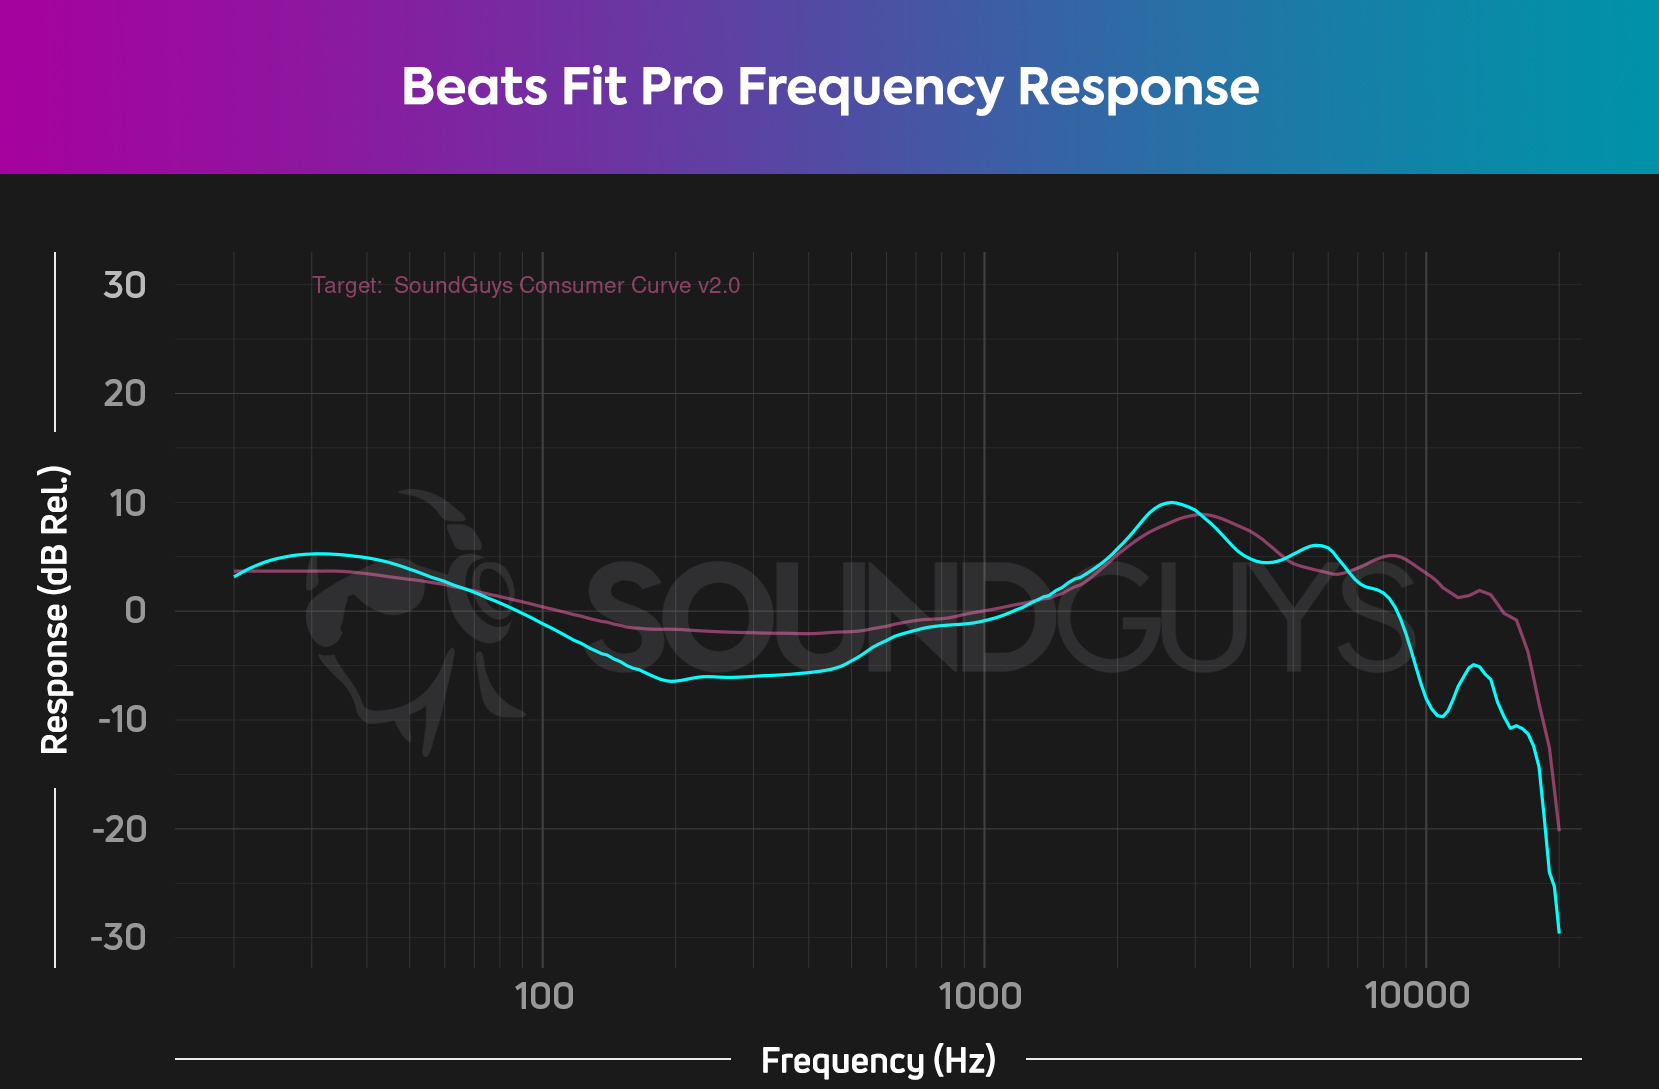 A plot showing the frequency response of the Beats Fit Pro, a set of earphones that fit the SoundGuys consumer target (pink) fairly well outside of the mids and highs.